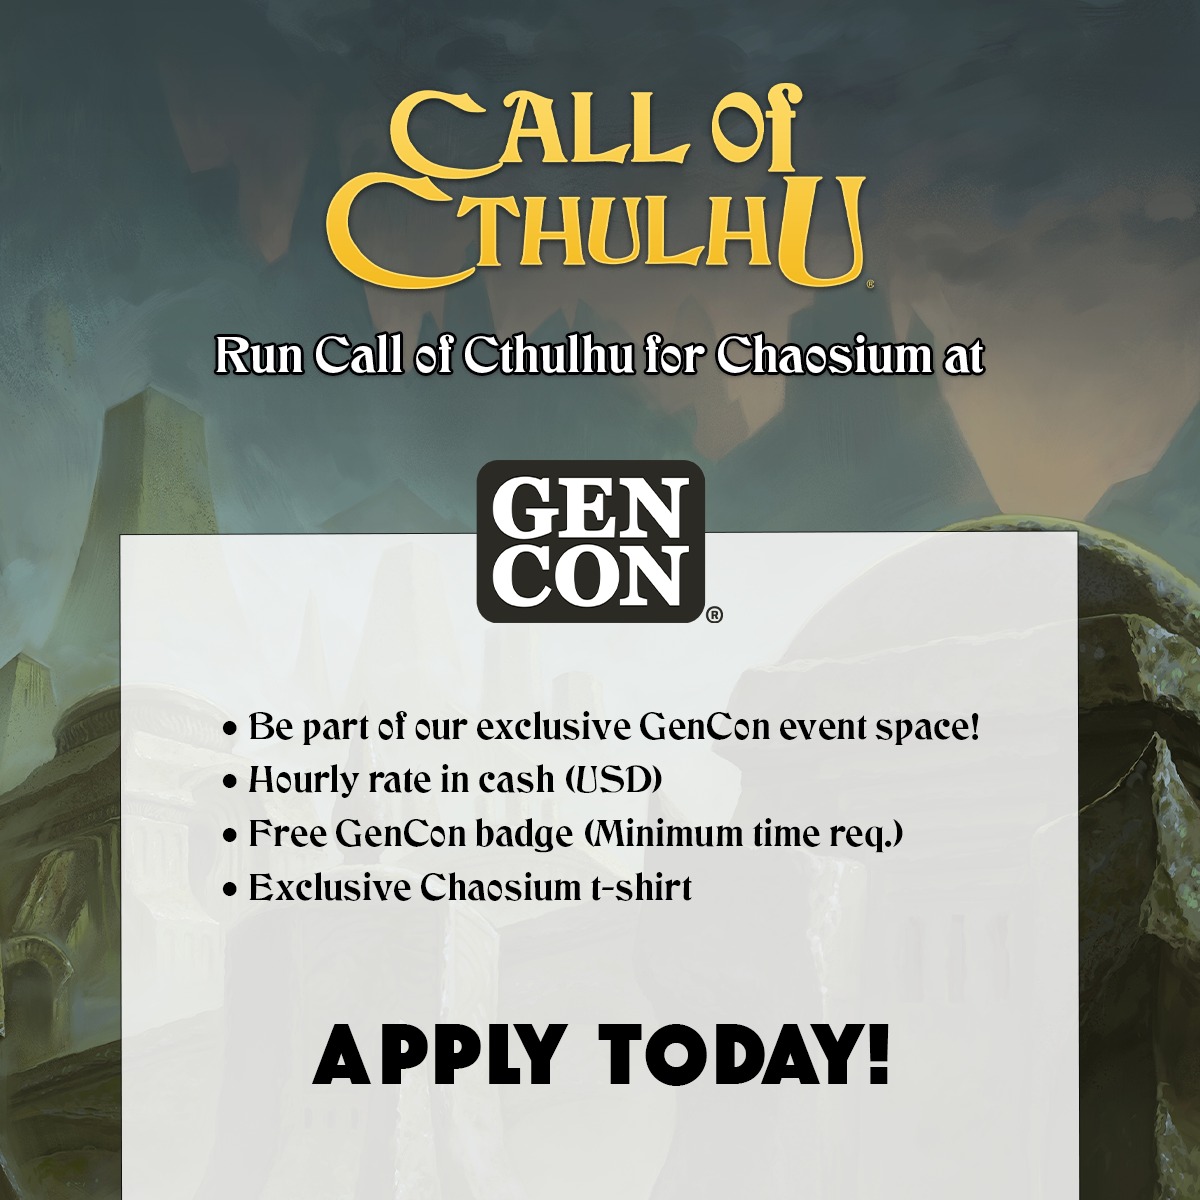 Call of Cthulhu is making a big splash at GenCon this year, and we're doing a special round of GM recruitment for our exclusive event space!  If you love running Call of Cthulhu, apply today